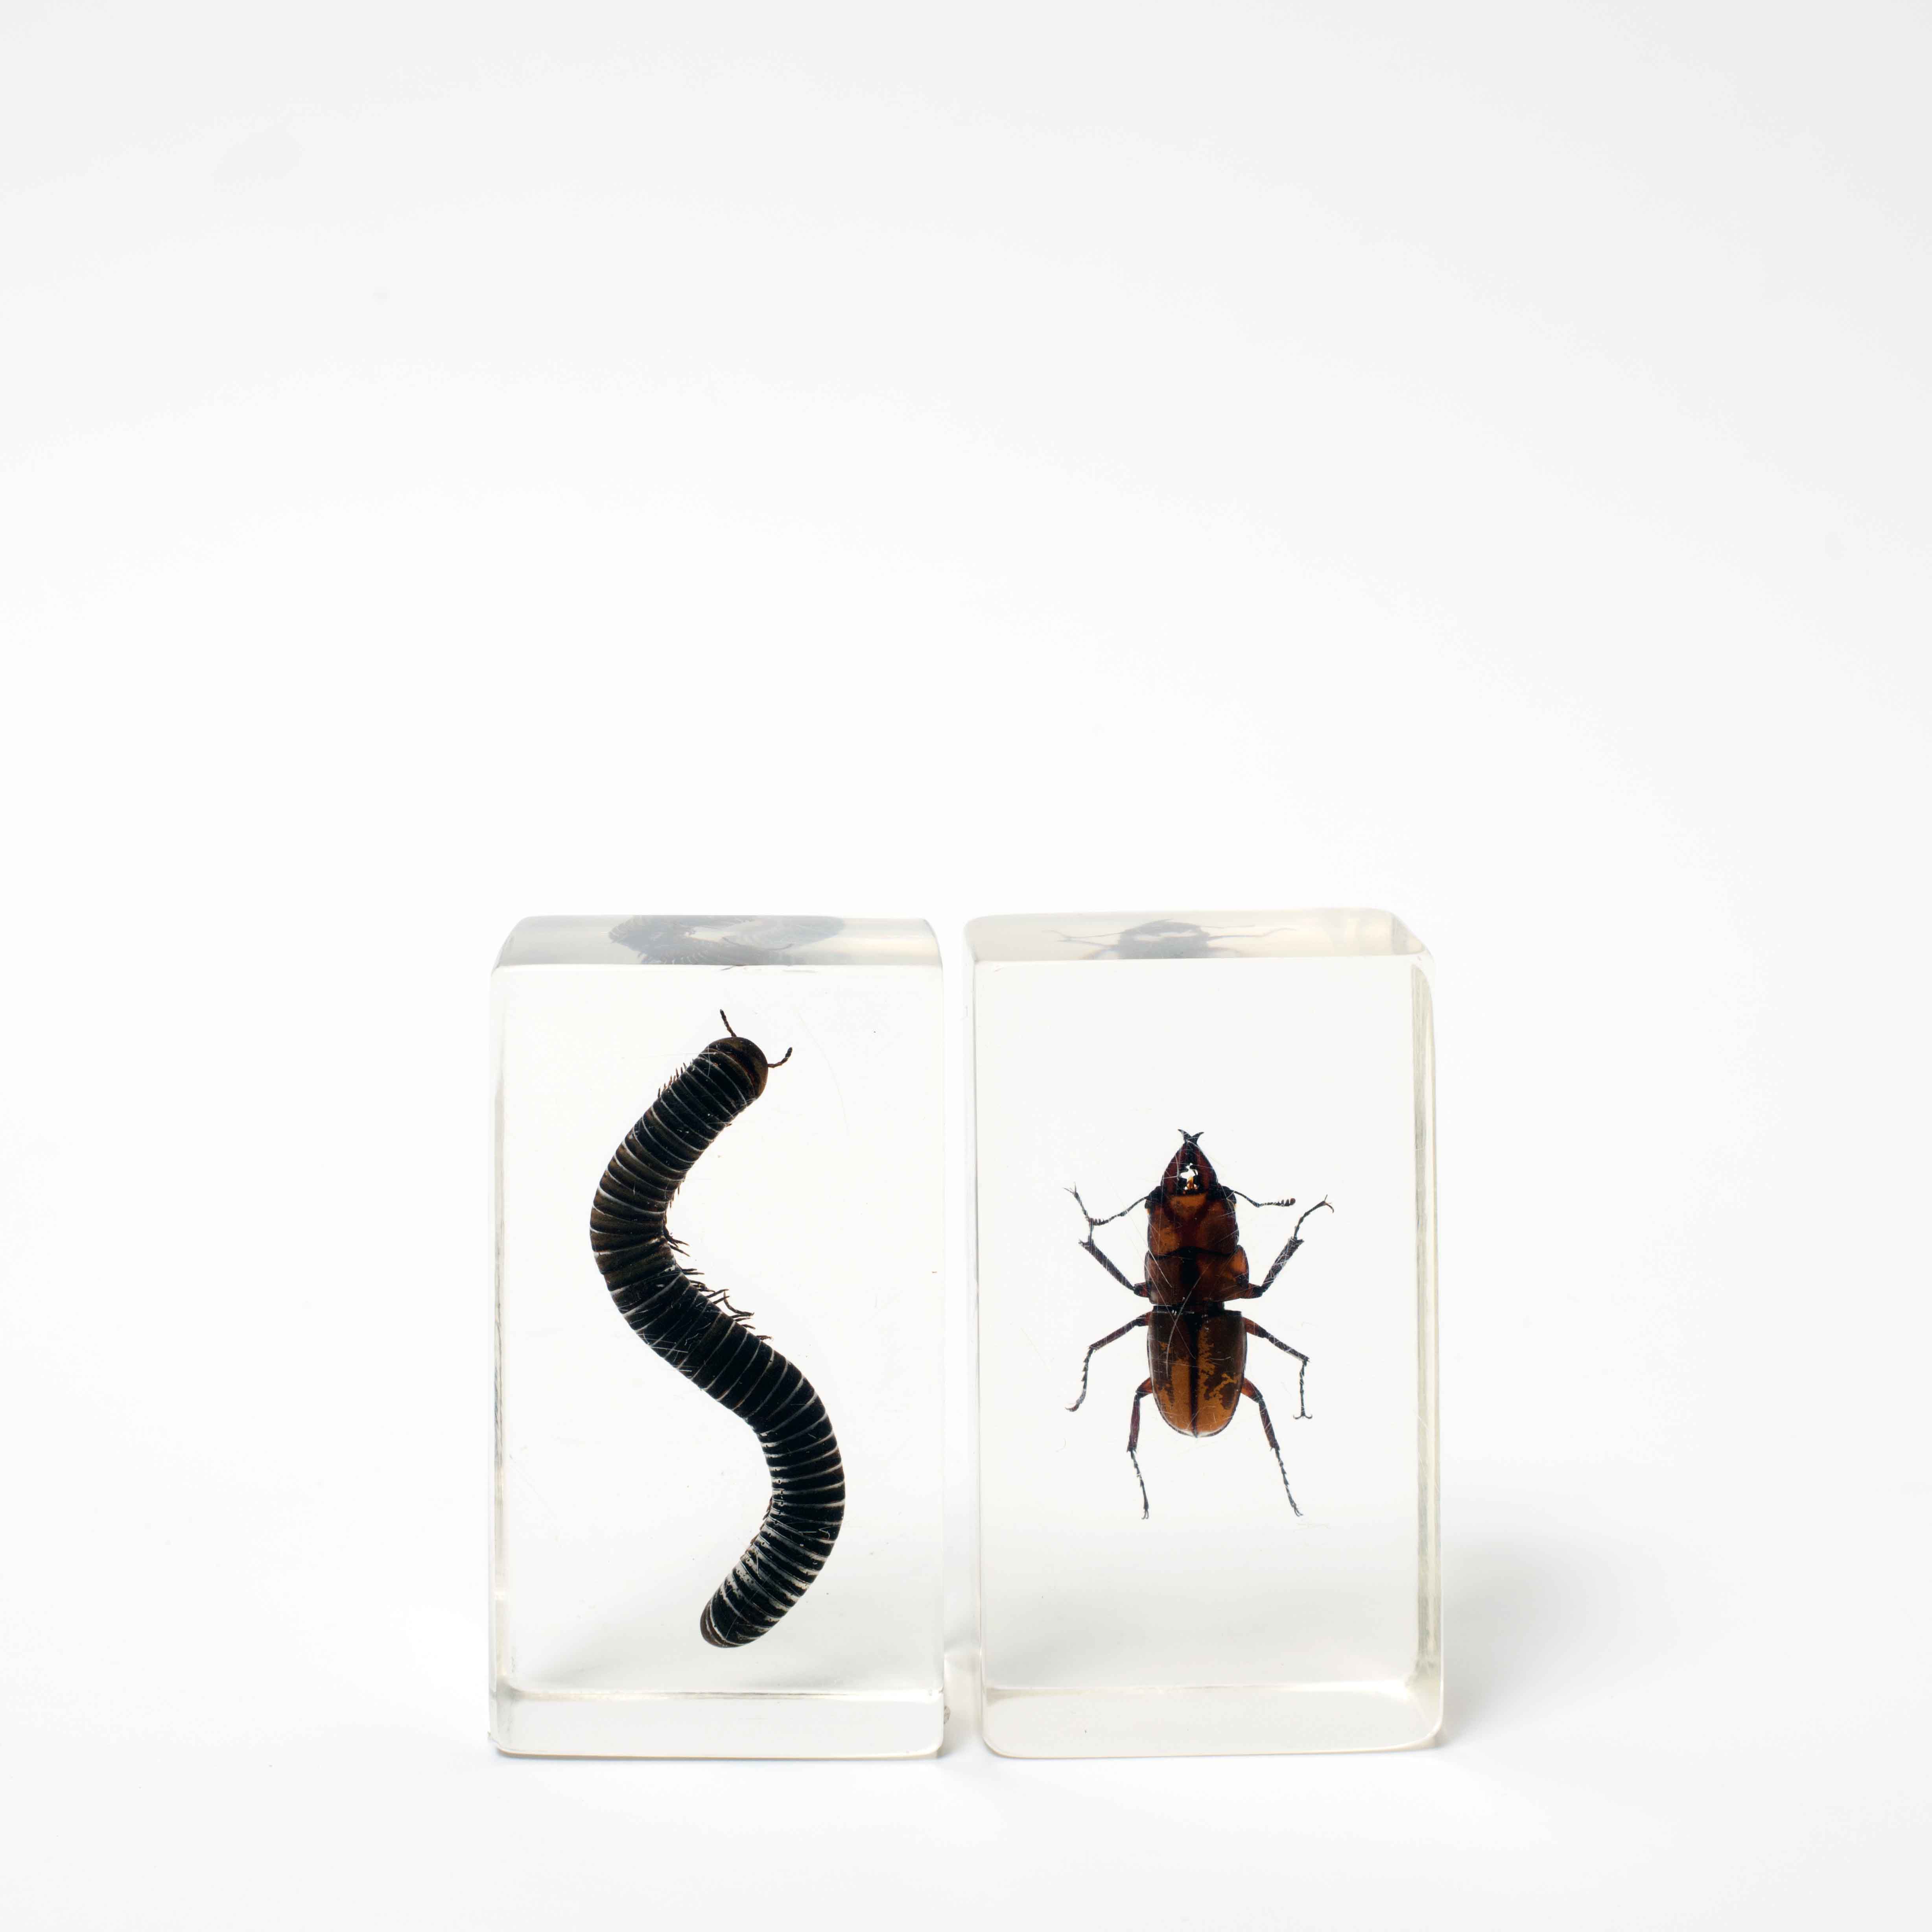 Resin insects found in 2011 shot by Lee Grant.